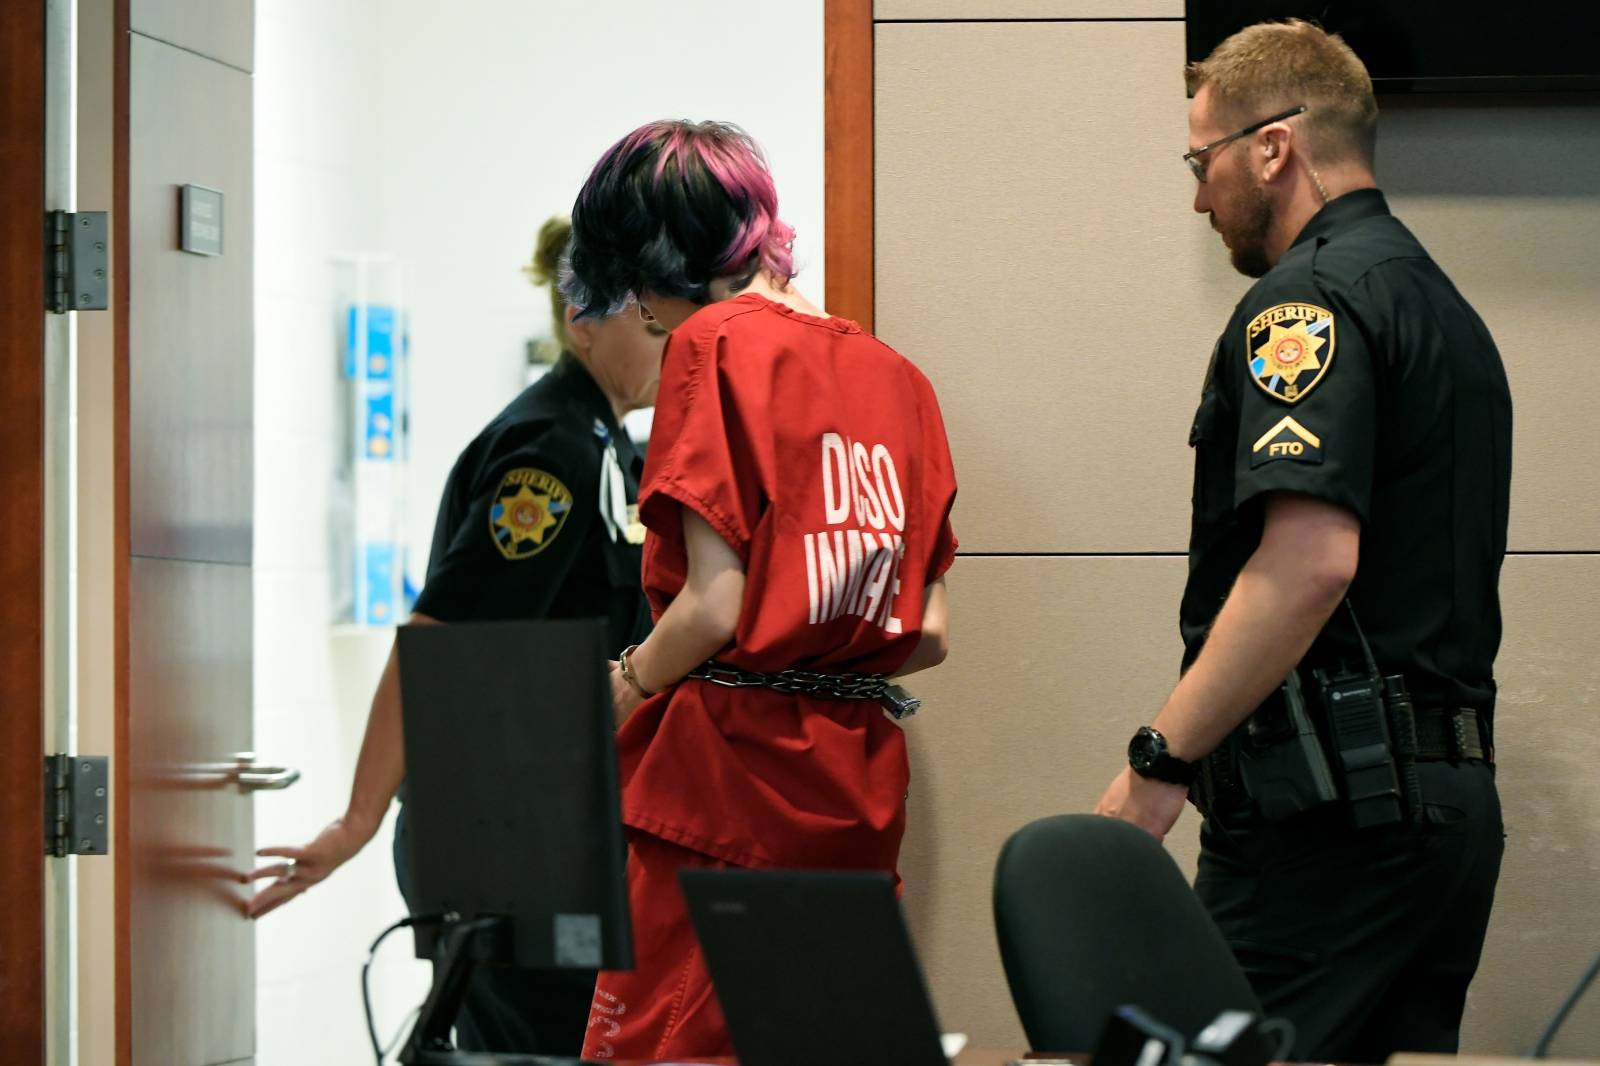 Devon Erickson, 18, accused of taking part in a deadly school shooting, is escorted from the Douglas County Courthouse, in Castle Rock, Colorado